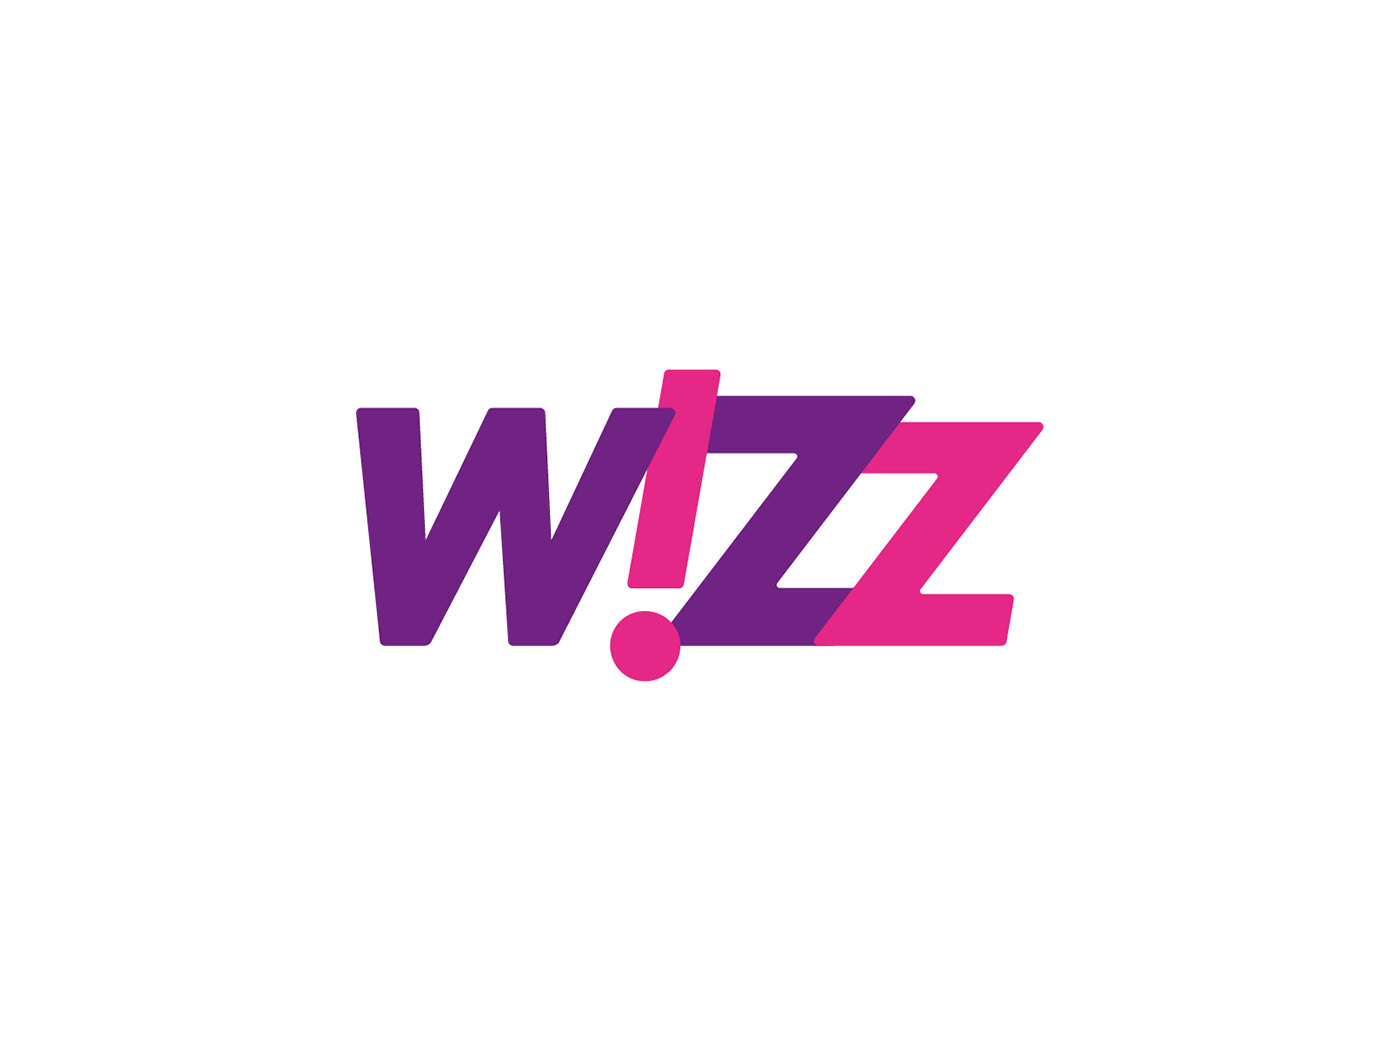 A logo for Wizz Air, an airline serving many cities across Europe, North Africa and the Middle East.